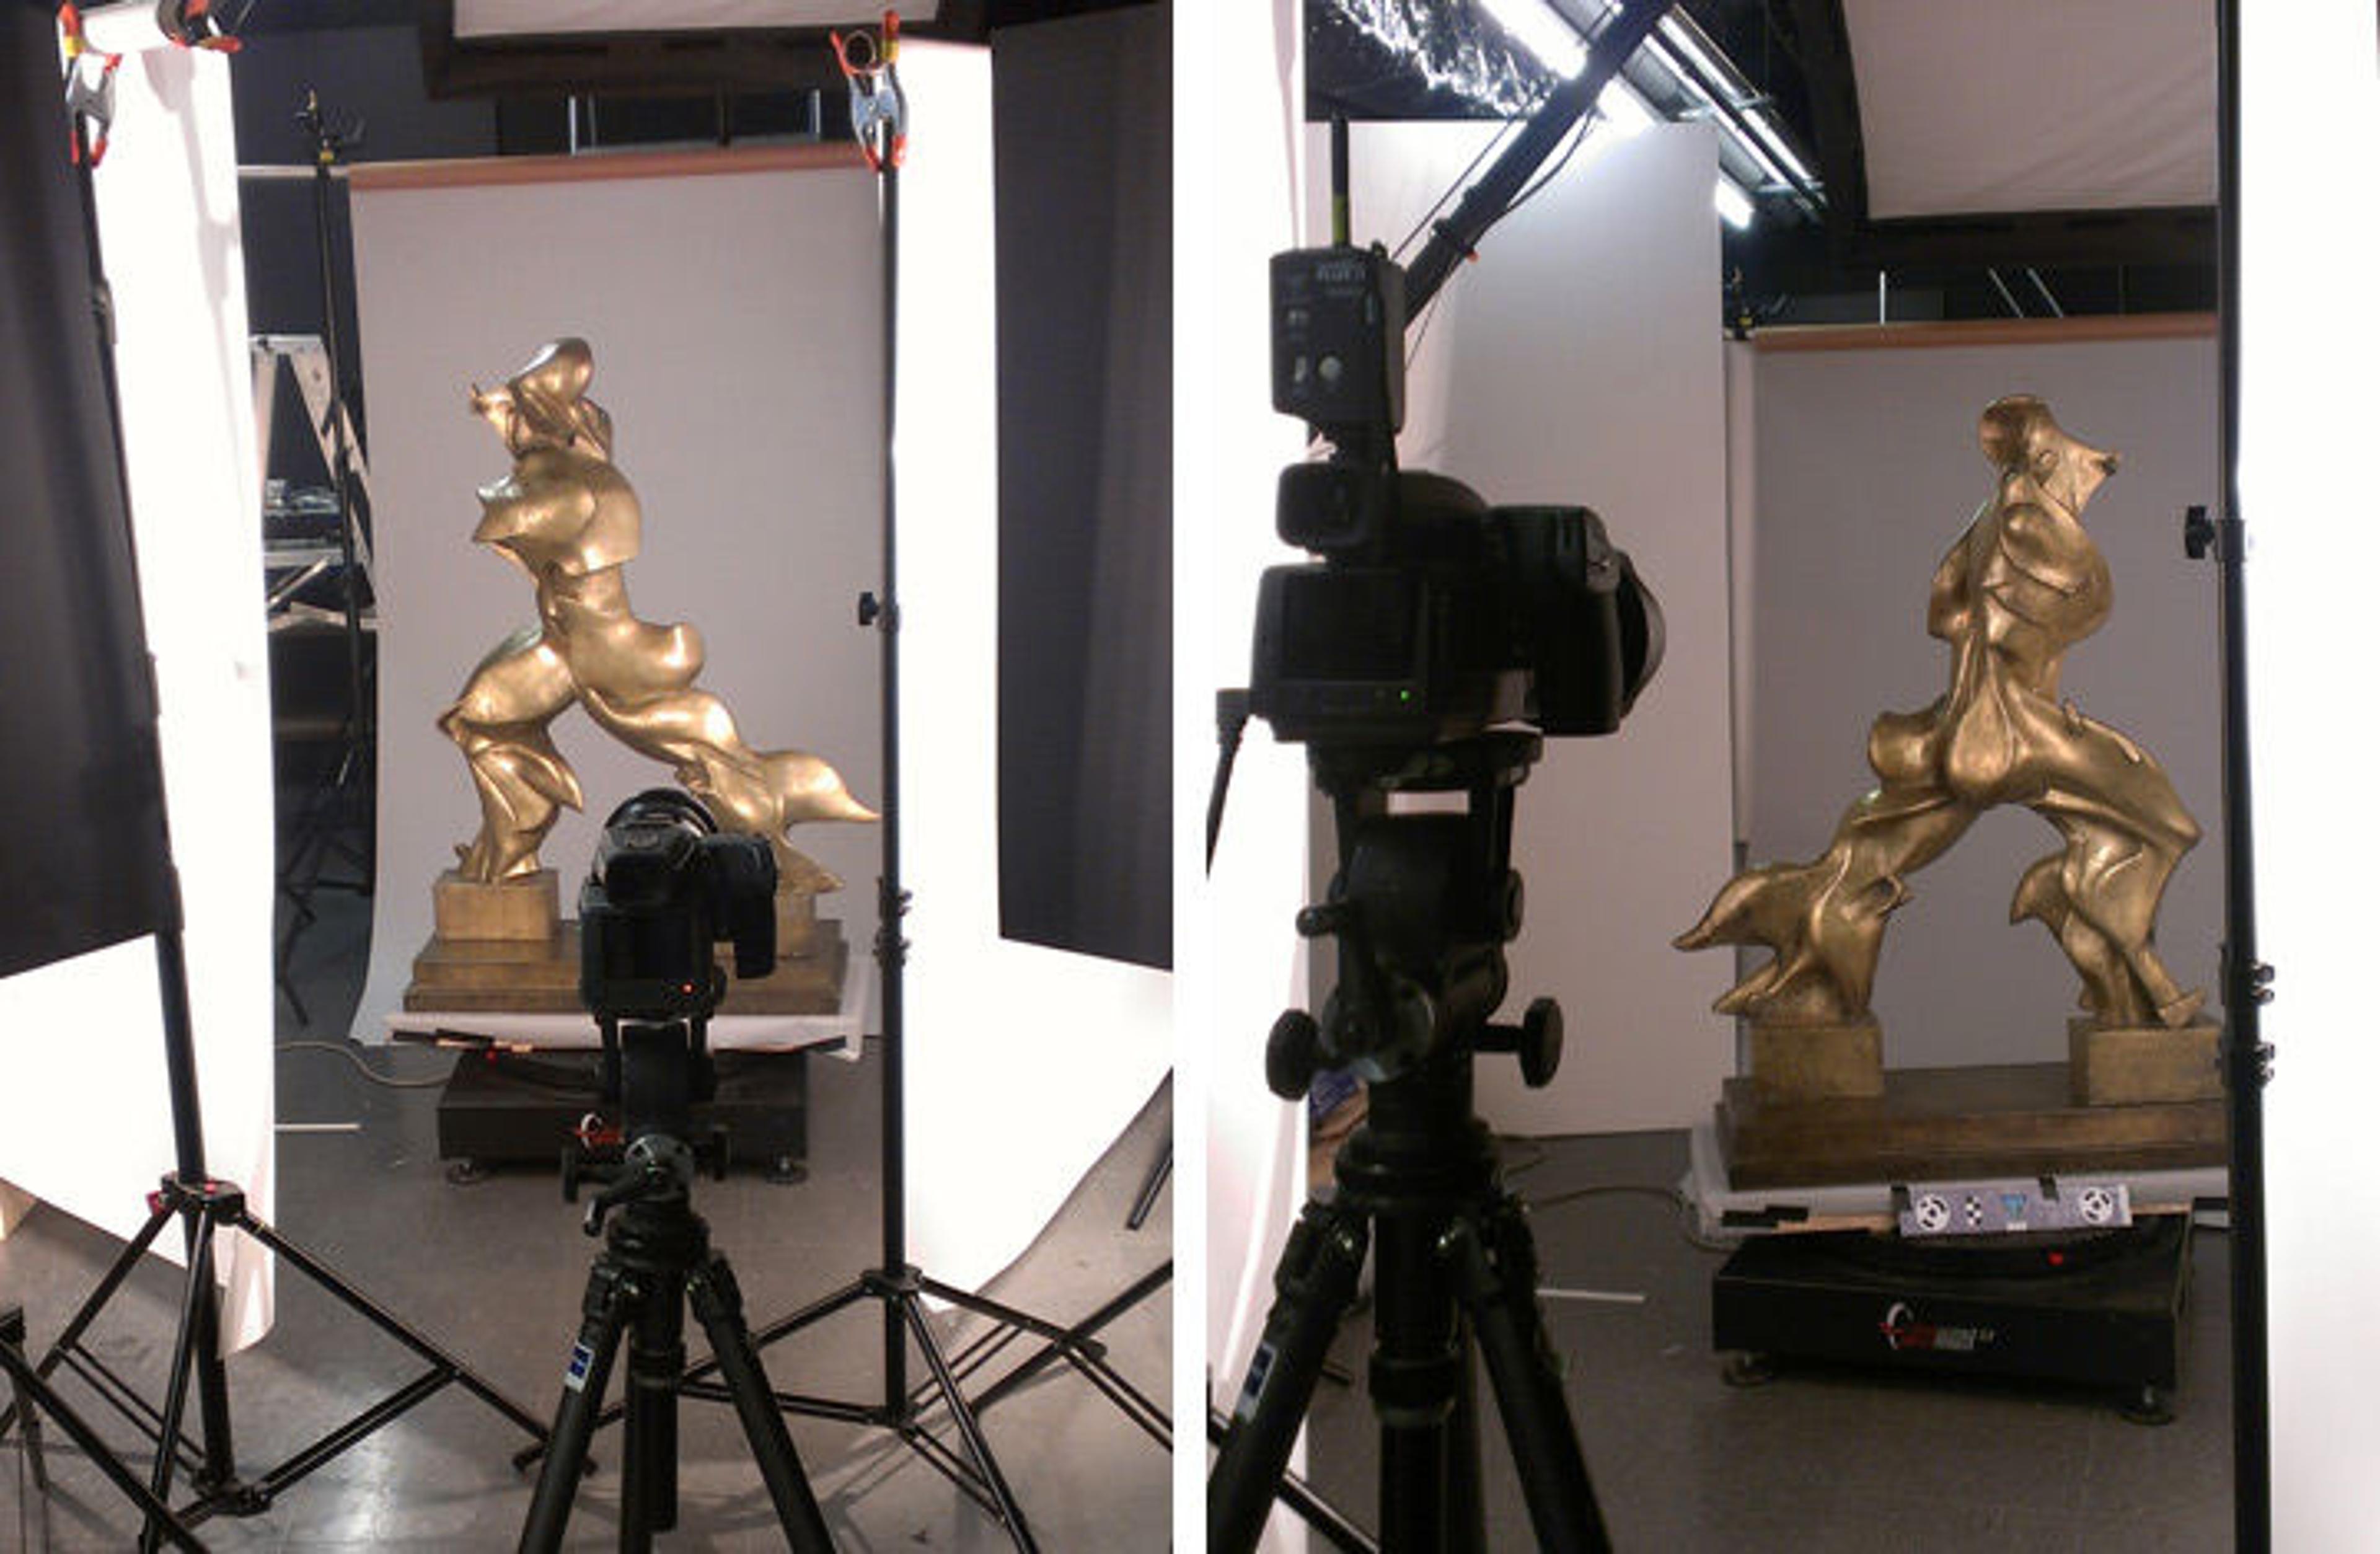 Two views of a bronze sculpture in the Photo Studio